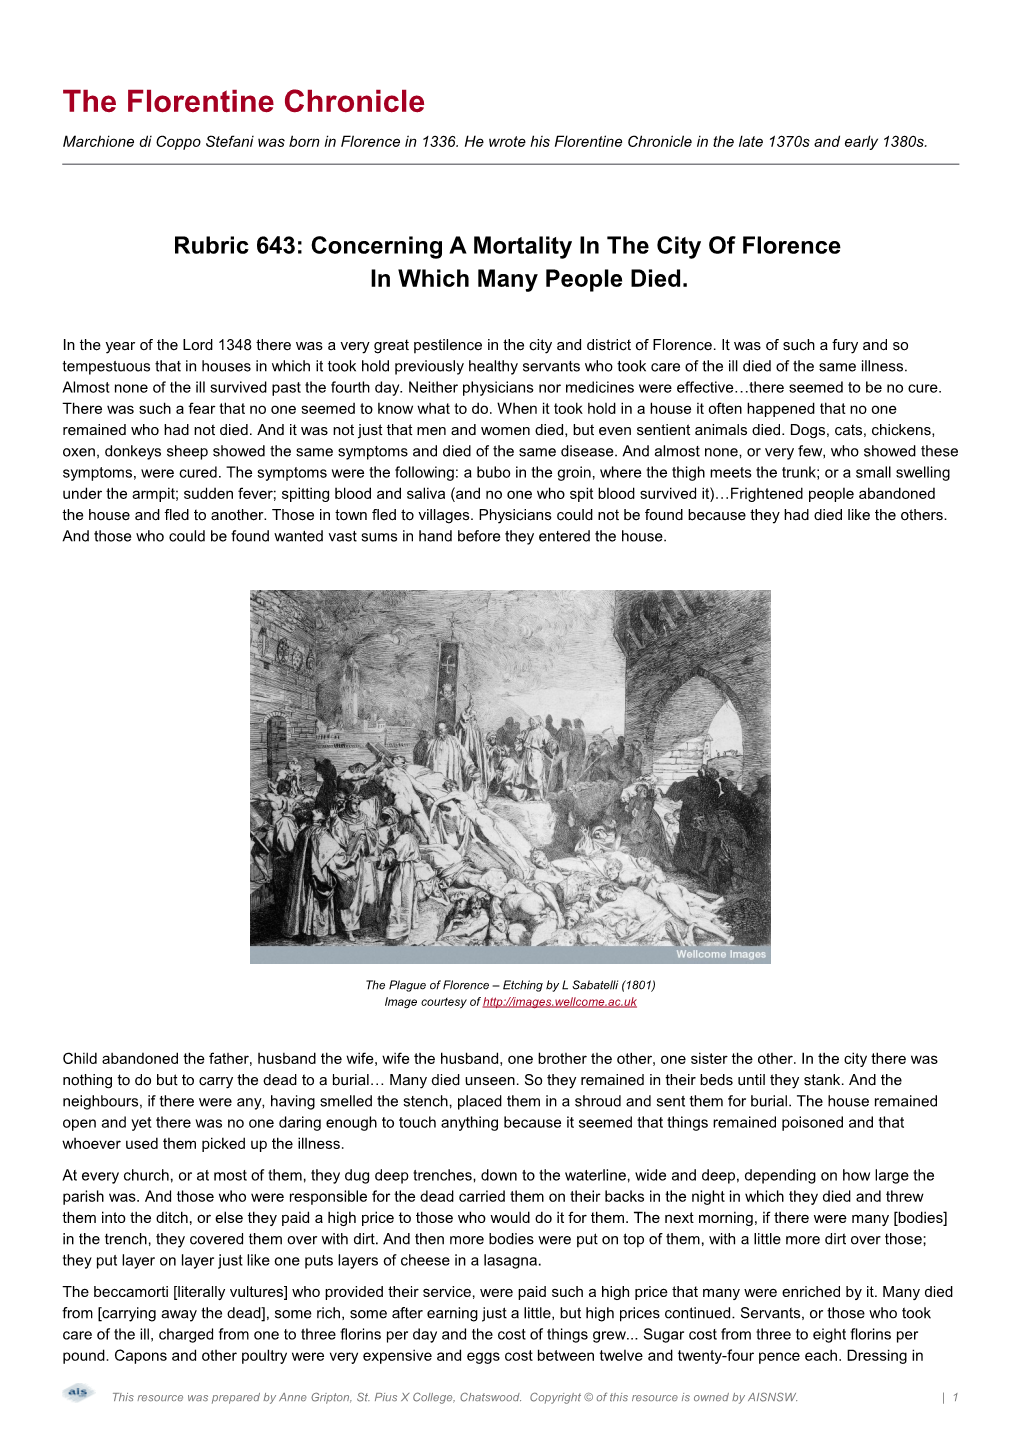 Rubric 643: Concerning a Mortality in the City of Florence in Which Many People Died